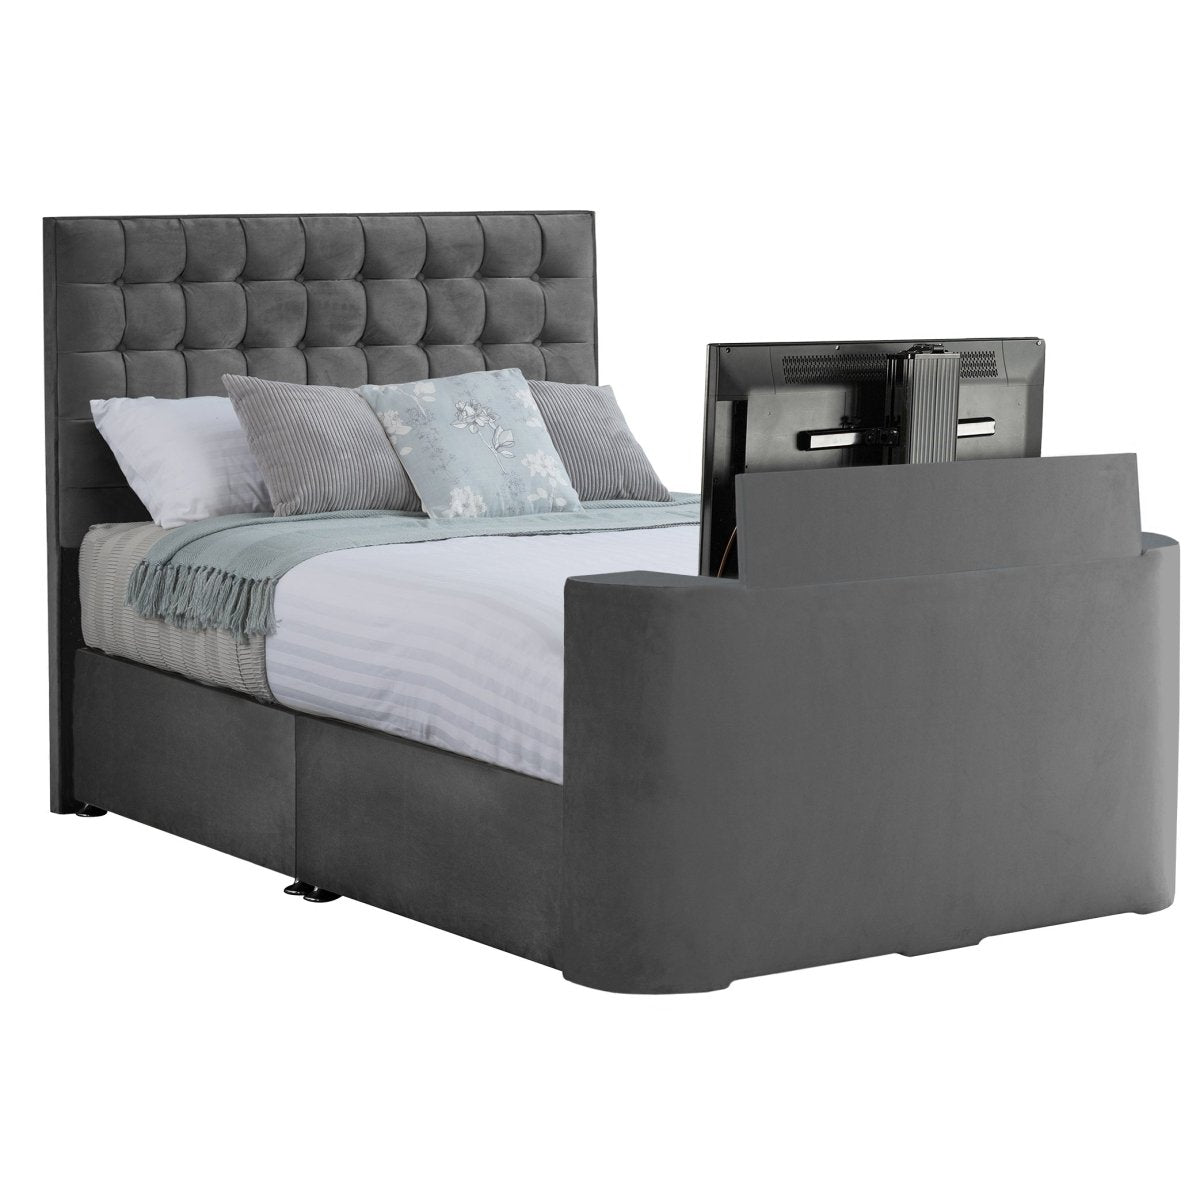 Sweet Dreams Image Classic TV Bed Frame - TV Beds Northwest - INIMA-CLA-135PT4DCHATS OYSTER - choose your colour tvbed - doubletvbed